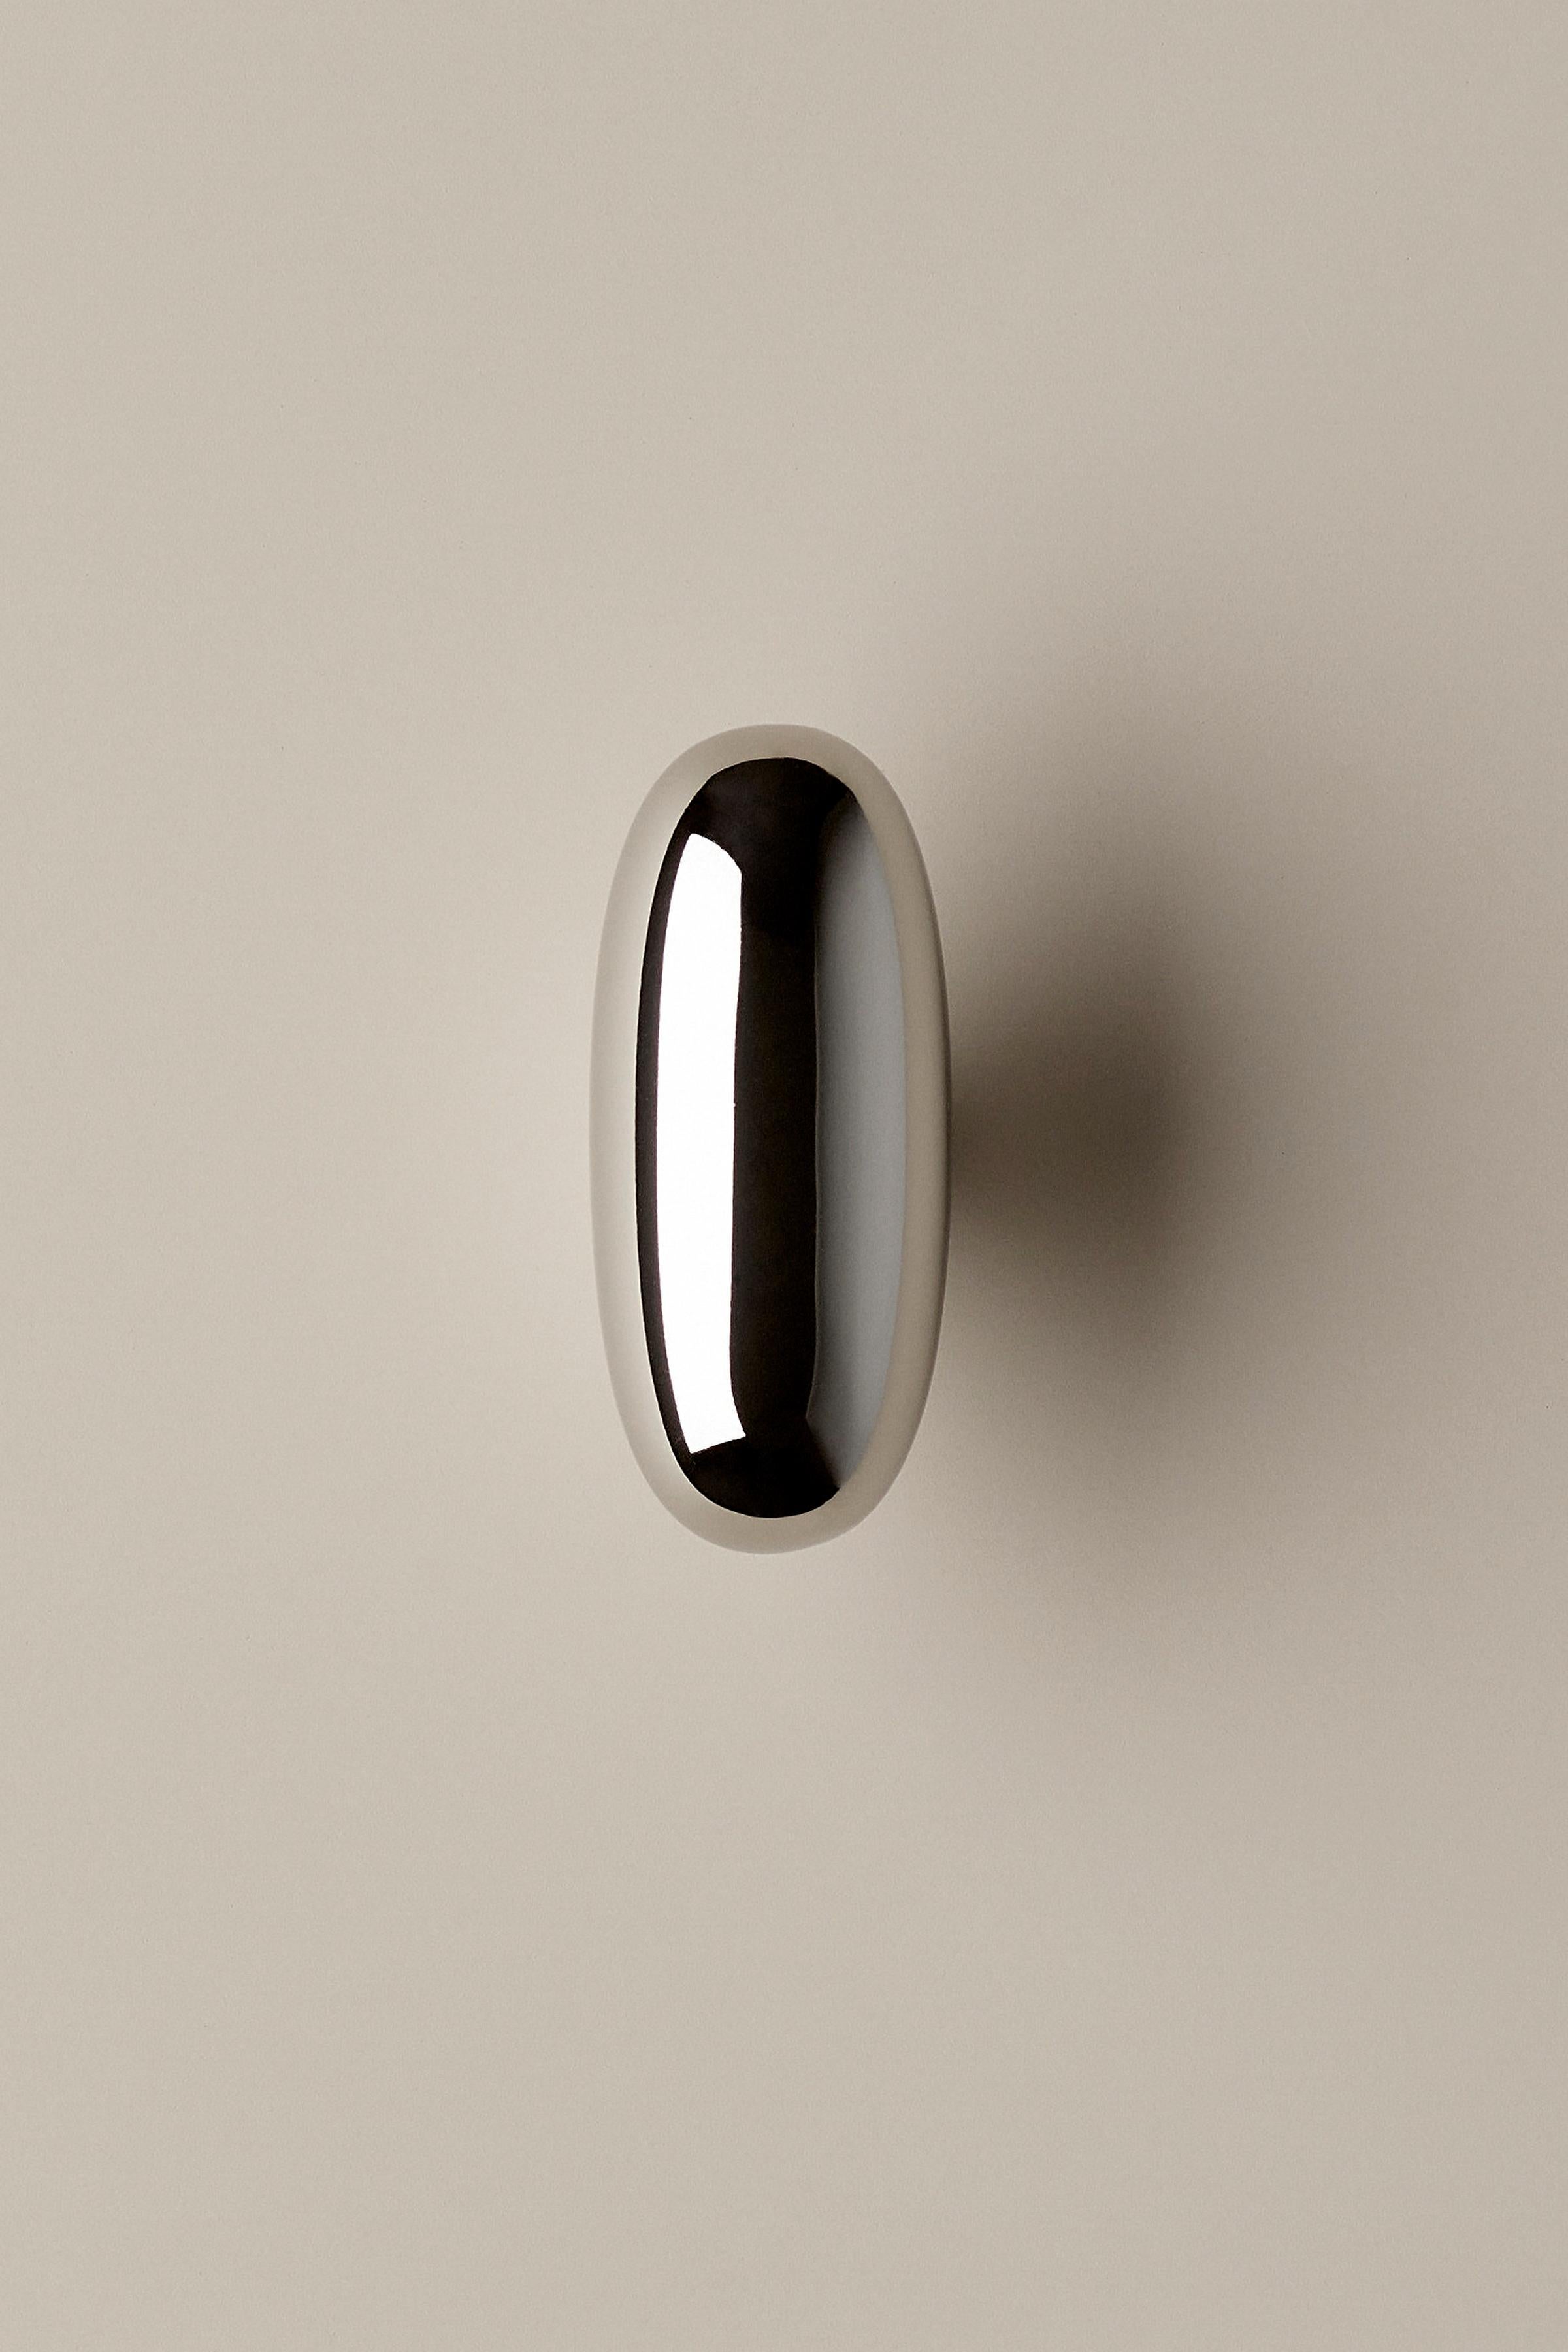 Contemporary Door Handle / Knob 'Blunt' by Spaces Within, Dark Brass For Sale 7